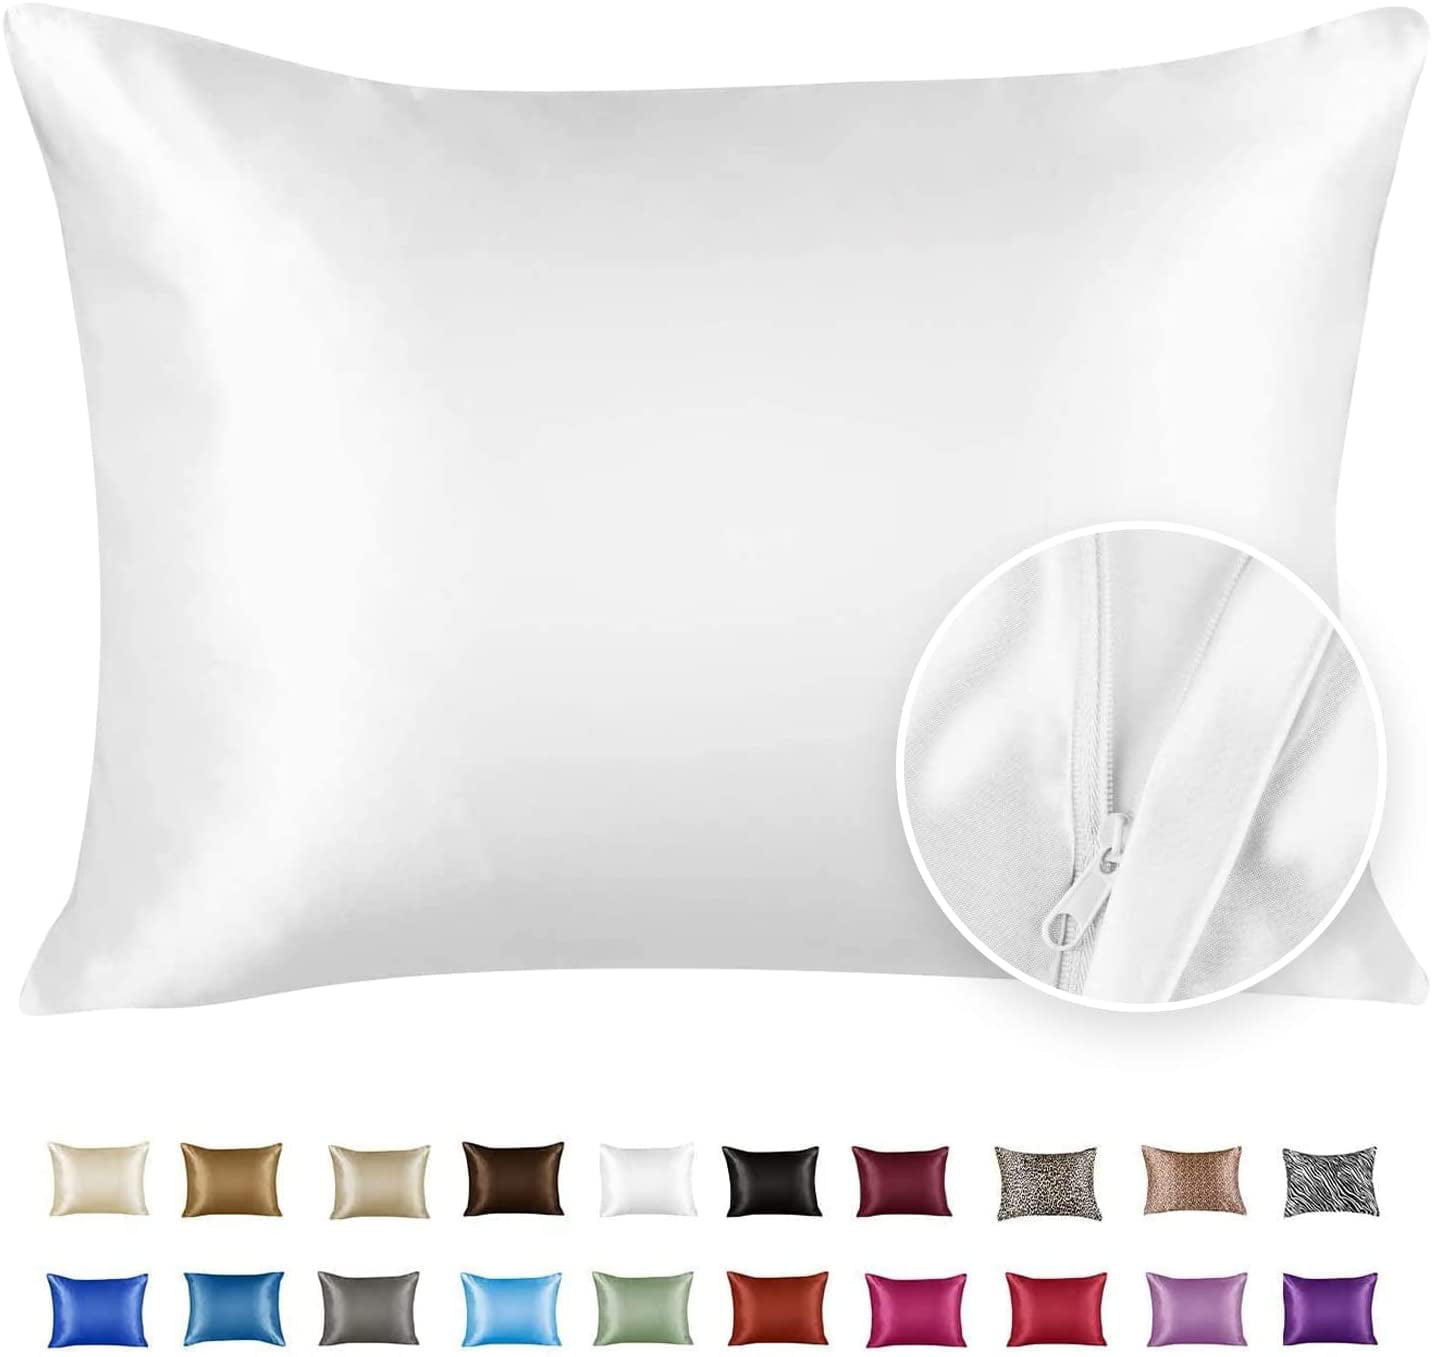 SATIN PILLOW CASES-STANDARD-NICE & SOFT--GOLD--GREAT GIFT-PICK FROM 4 COLORS 2 